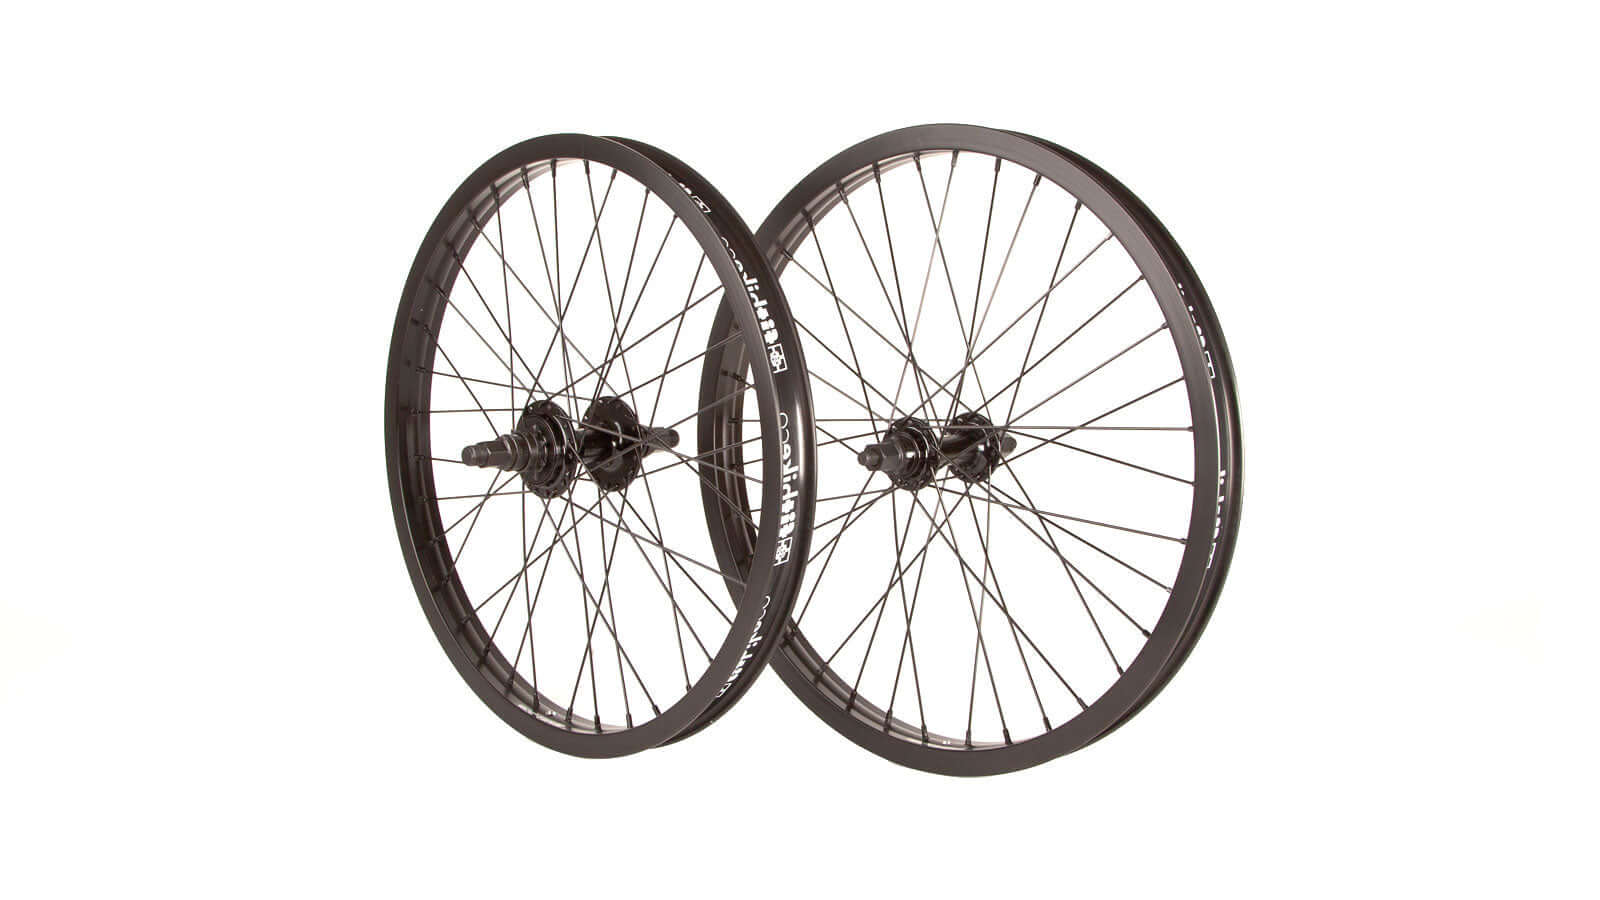 20" FIT OEM WHEELSET BLACK RHD-Featuring fully sealed hubs front and rear laced to light and strong FIT Double Wall OEM rims. Specifications 3/8" Front Axle male 4mm Rear Axle male 9T R.H.D. Cassette Driver 36H Fit OEM Double Wall Rims FIT Rim Strip-5050 Bike & Skate